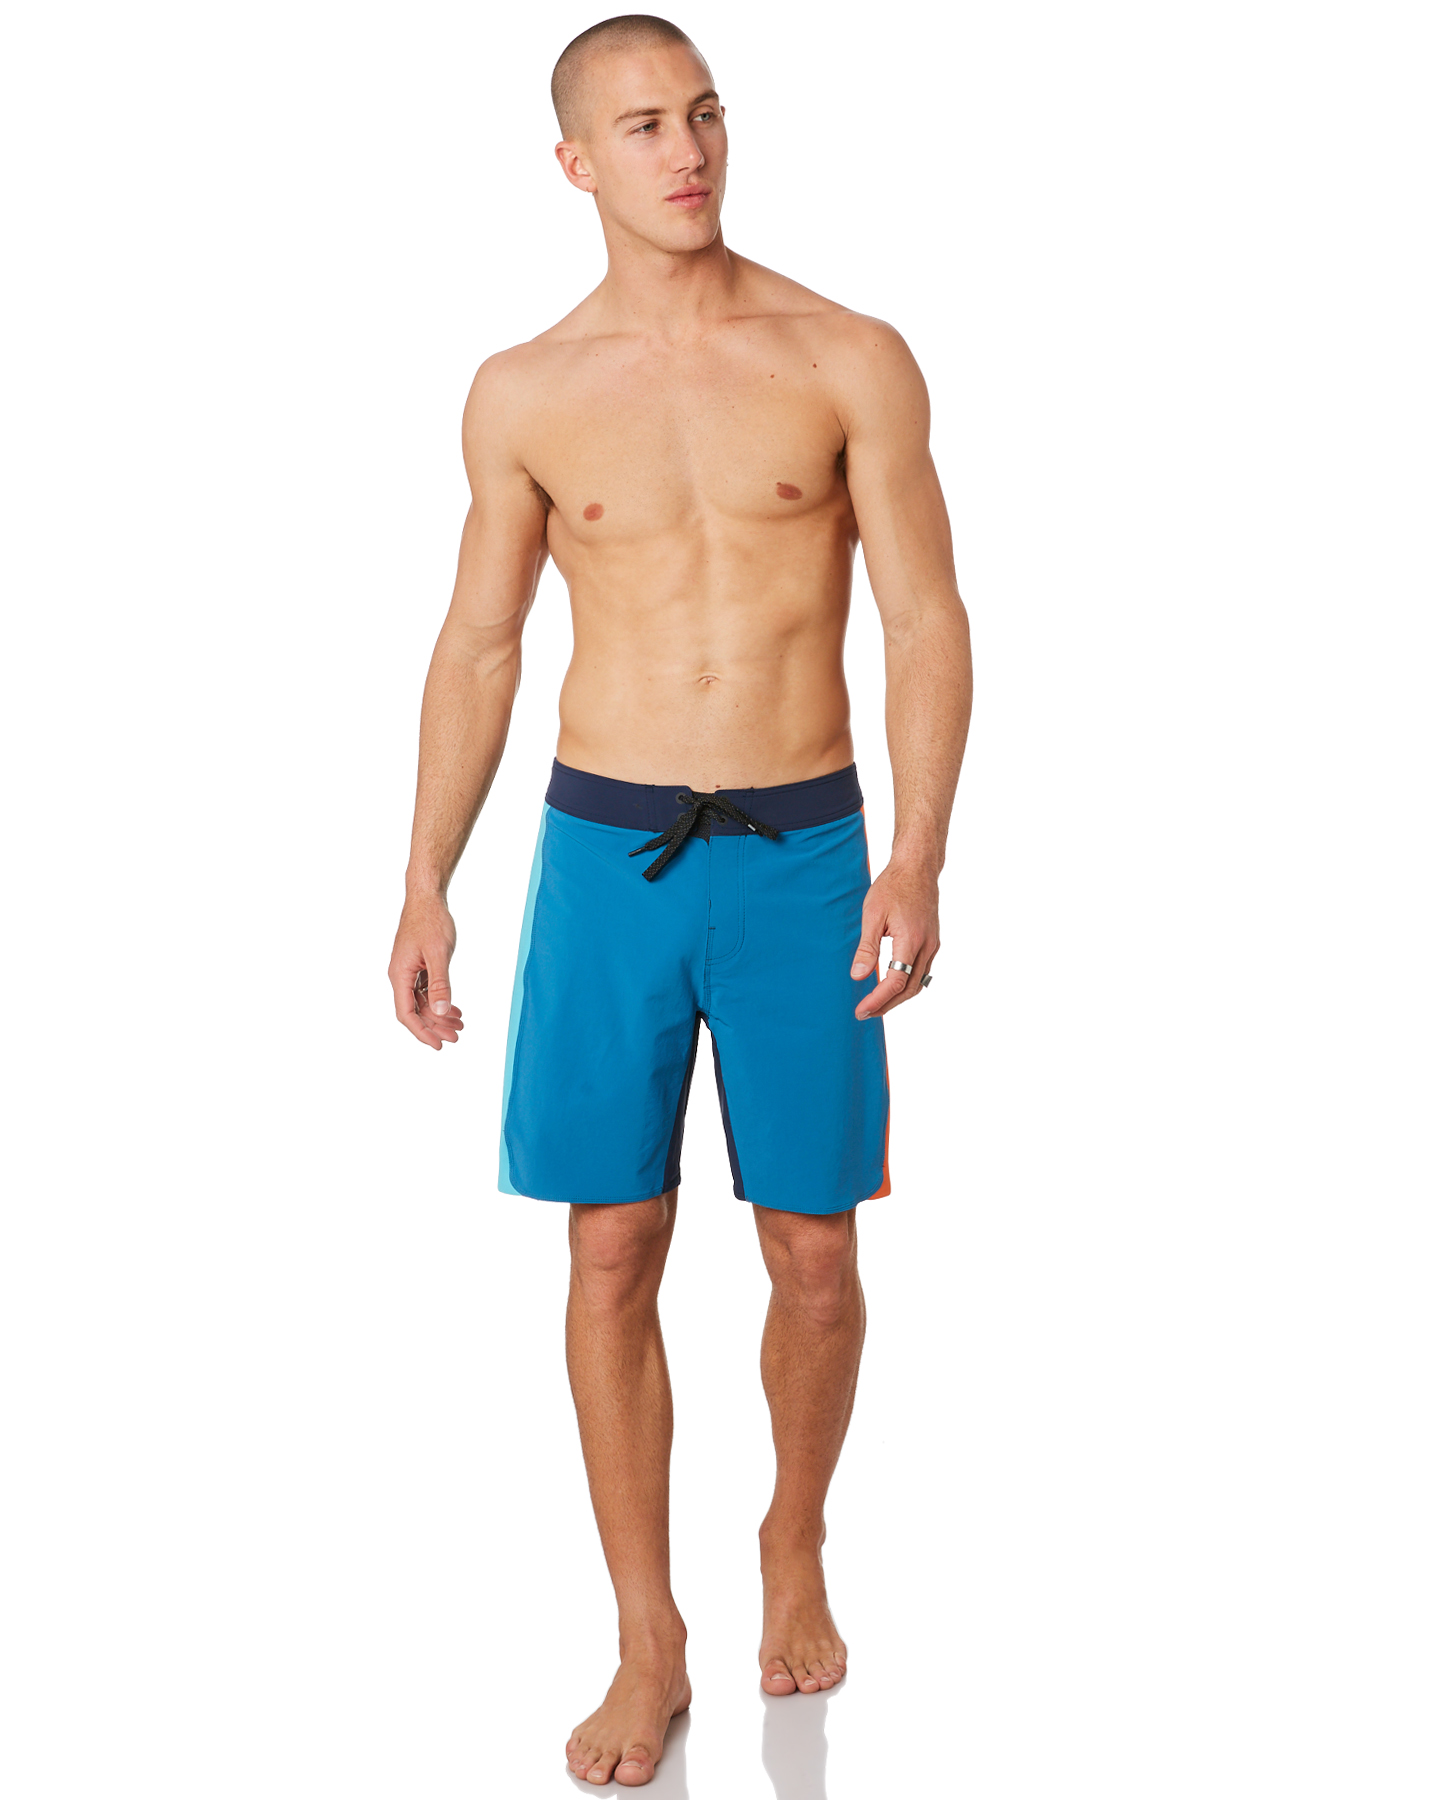 Rip Curl Mirage 3 2 One Ultimate Mens Boardshort - Navy | SurfStitch